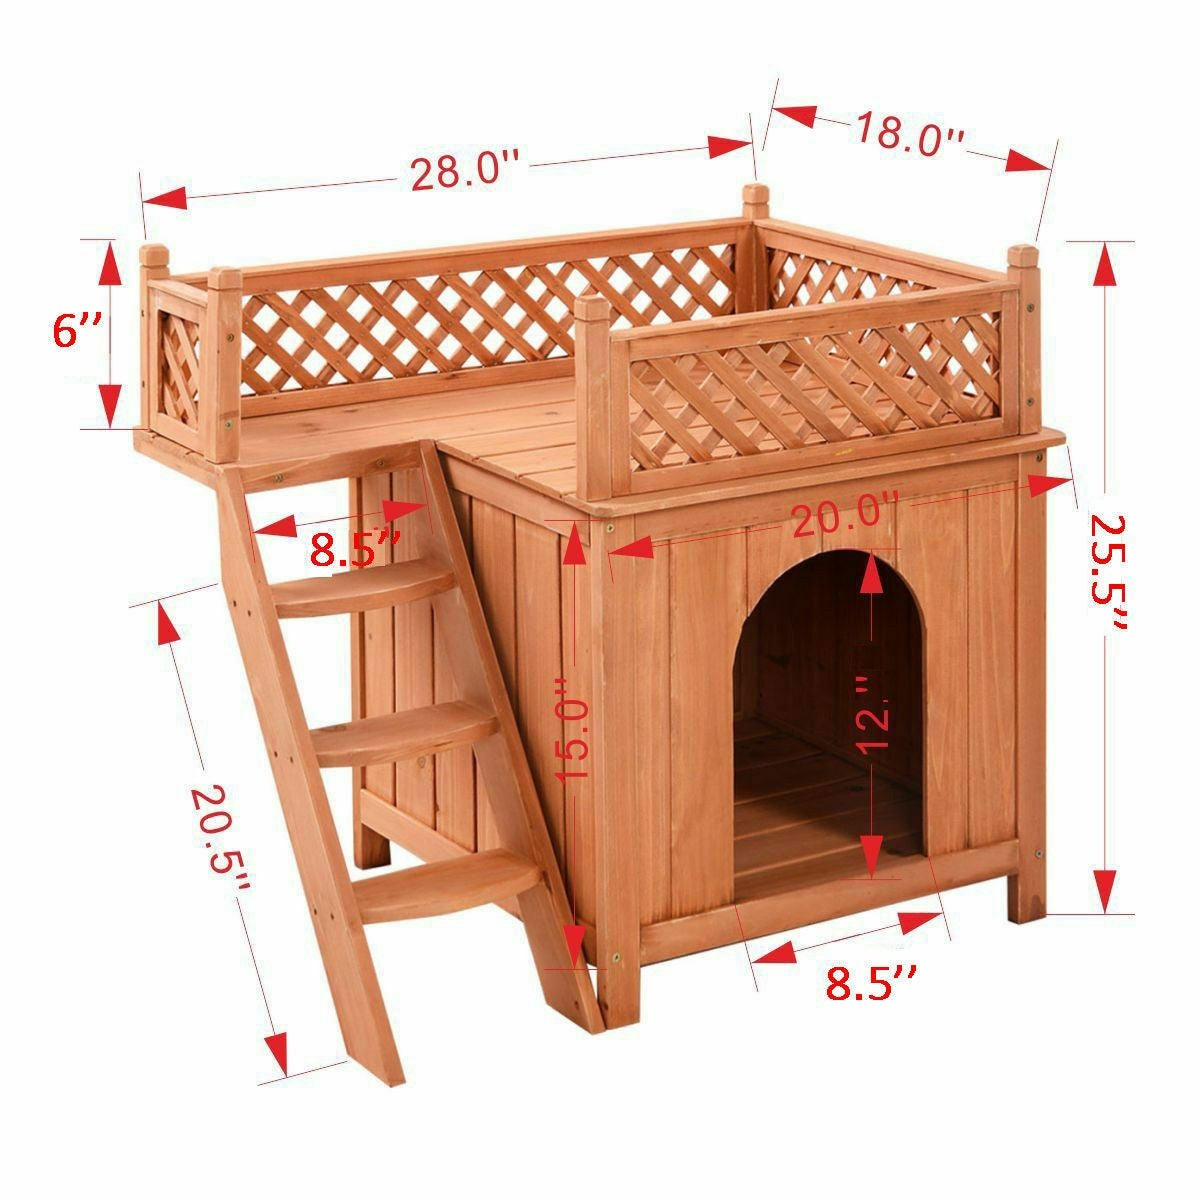 Wooden Dog Room Shelter with Stairs - Giantex